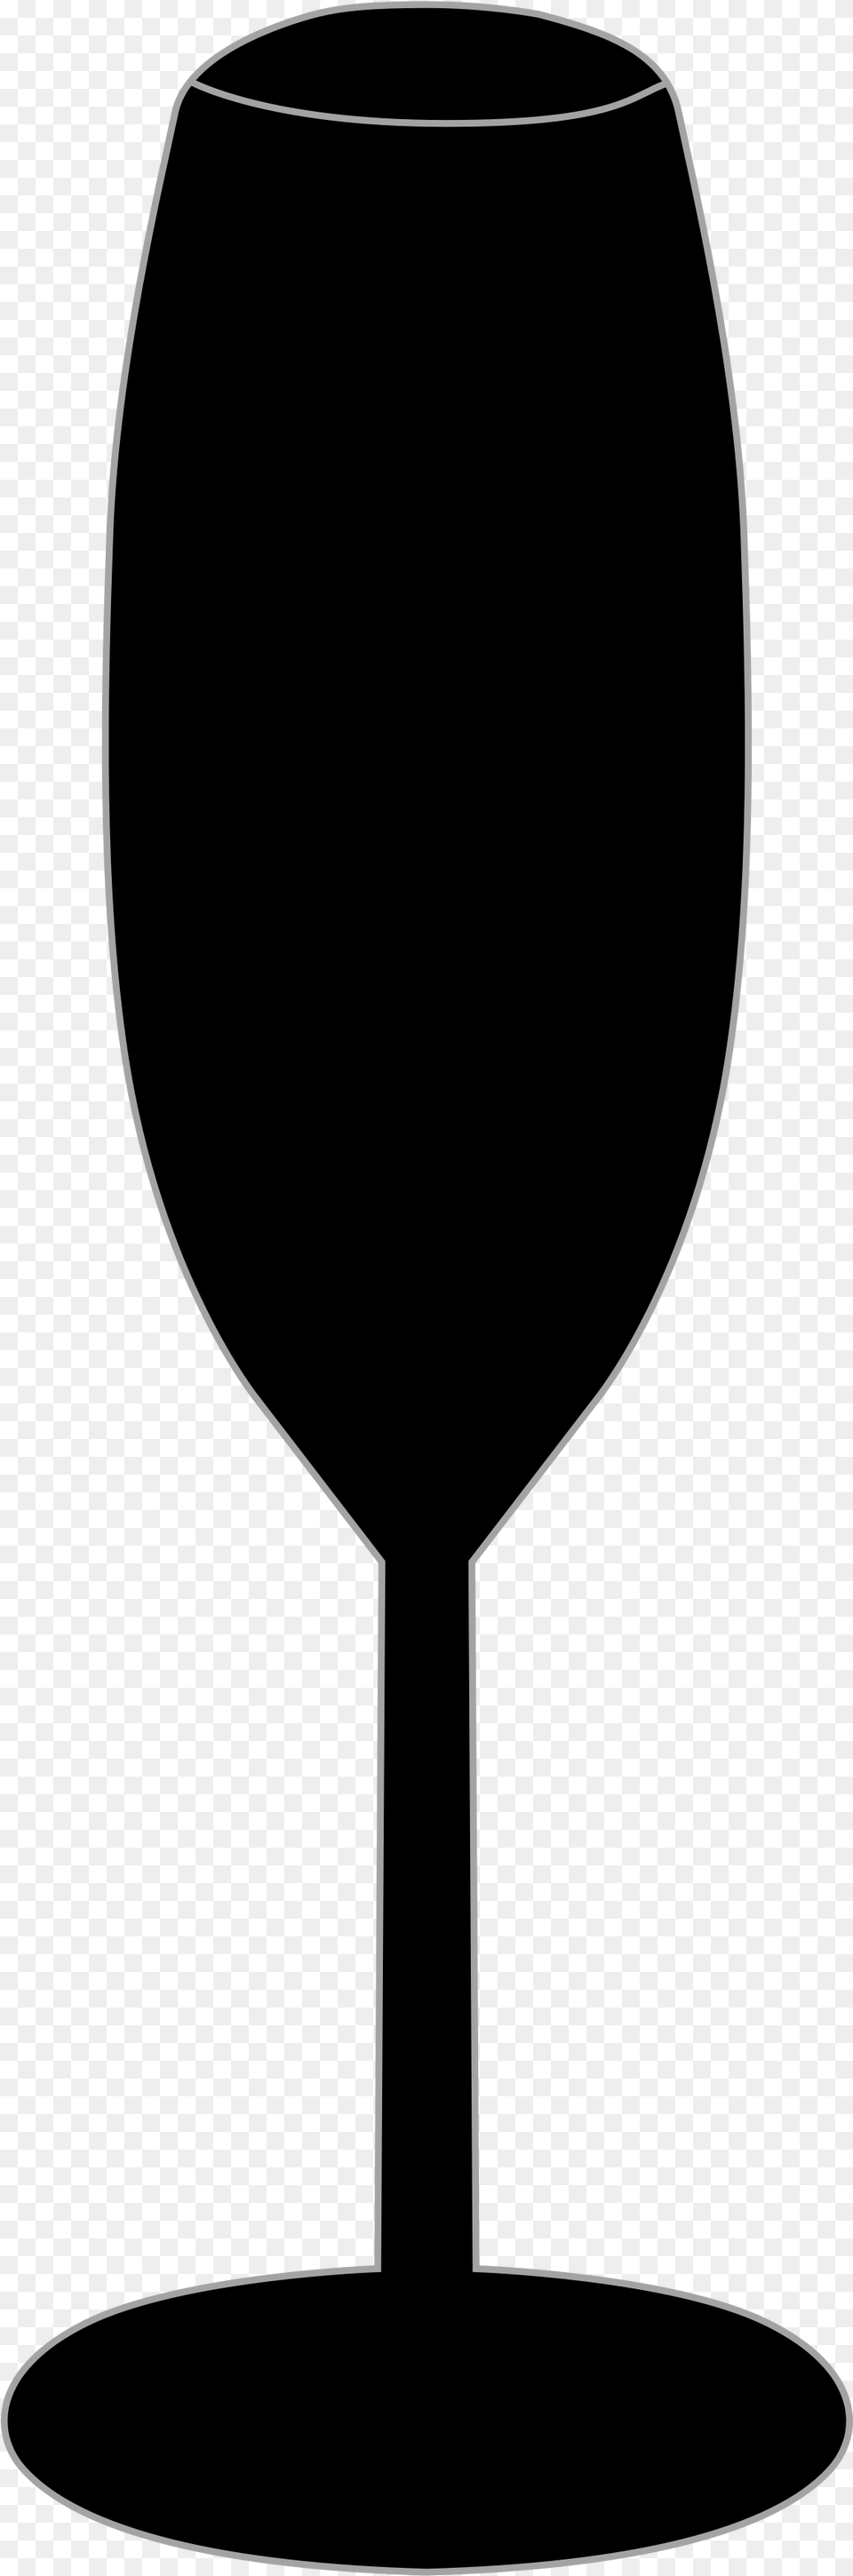 Champagne Glass, Wine Glass, Alcohol, Beverage, Goblet Free Transparent Png